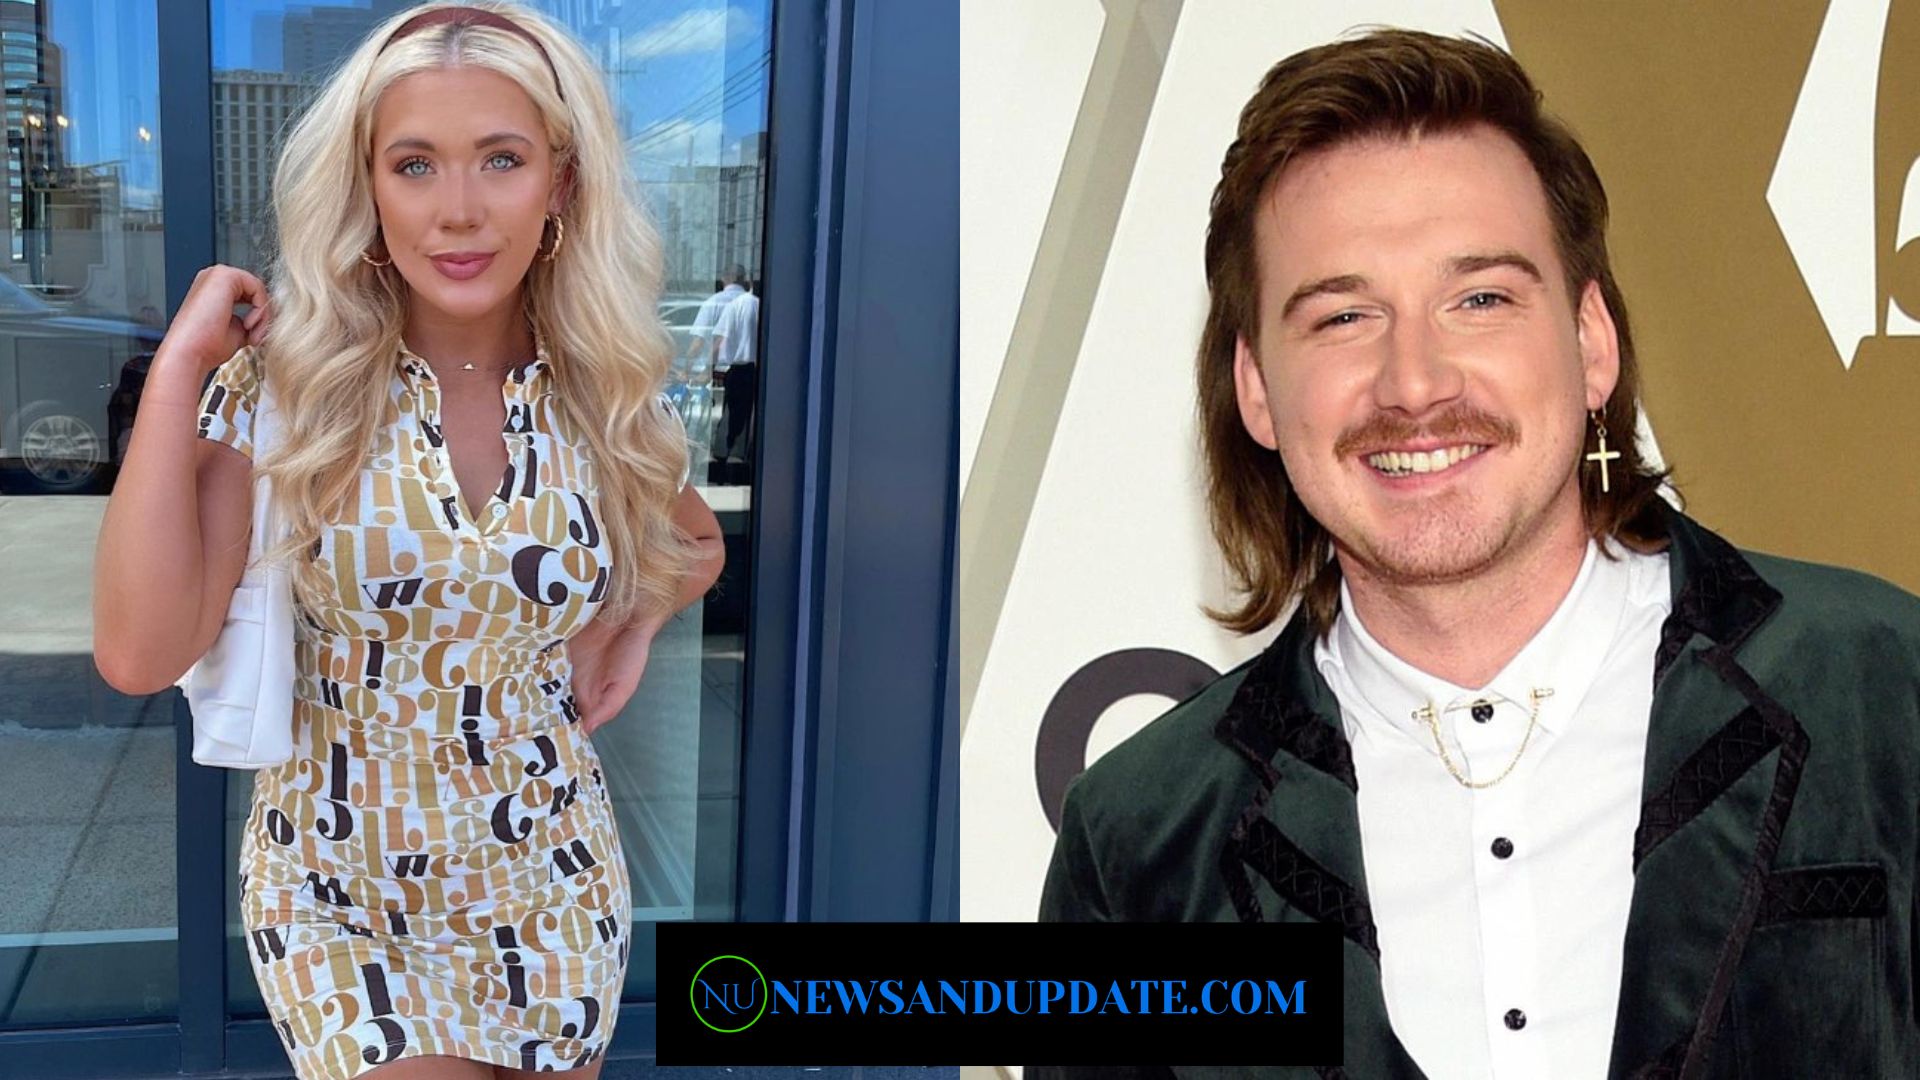 Is Megan Moroney Dating Morgan Wallen? All You Need To Know!